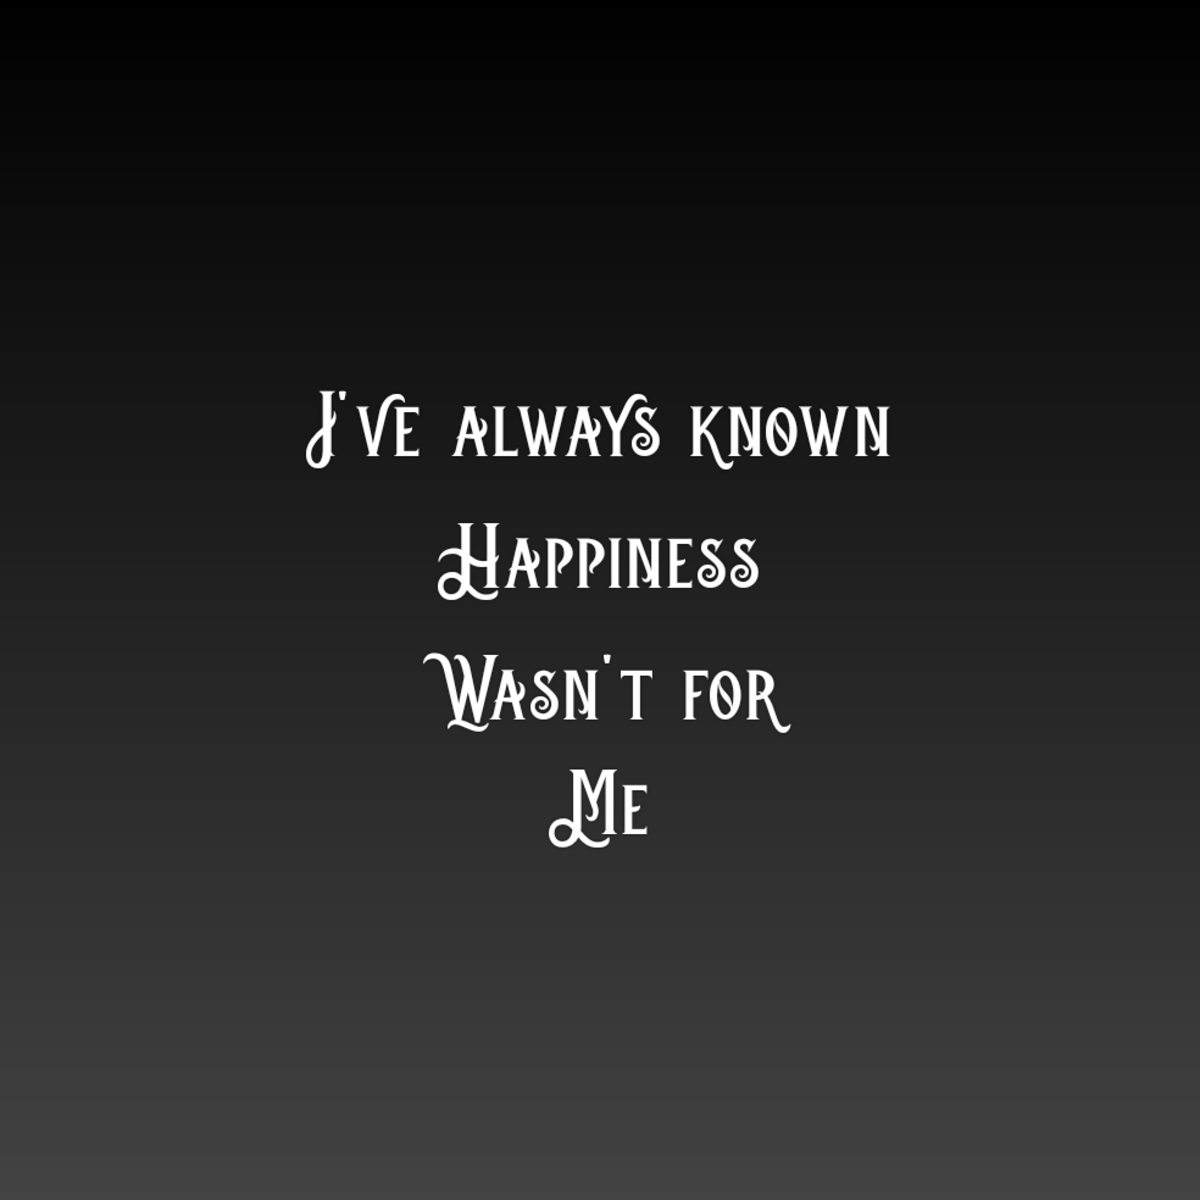 I've Always Known Happiness Wasn't For Me.